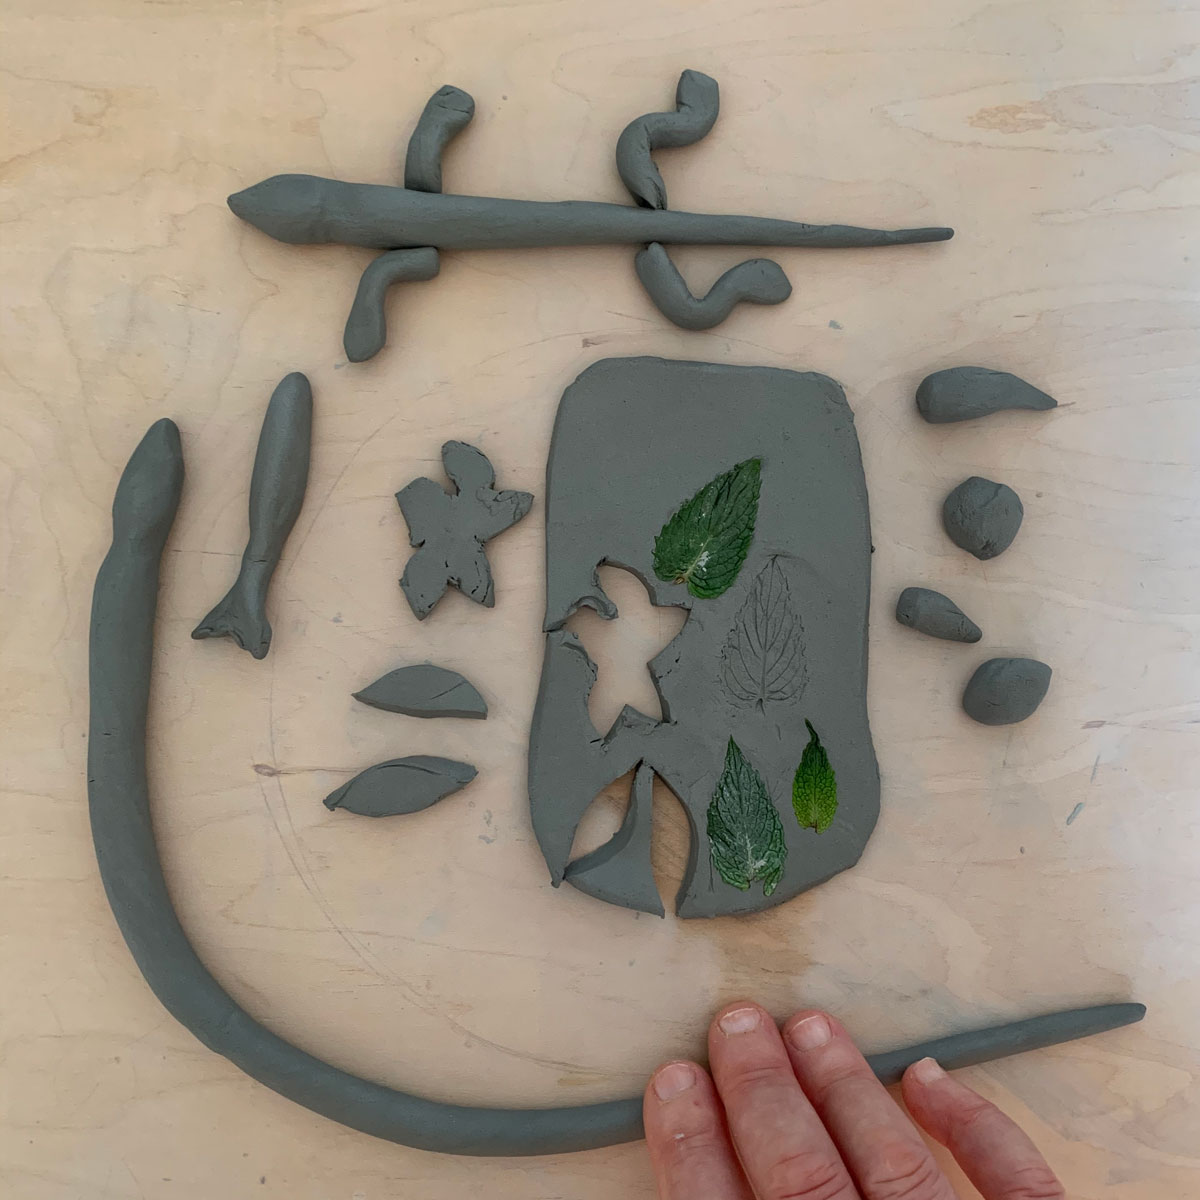 Cut out clay leaves